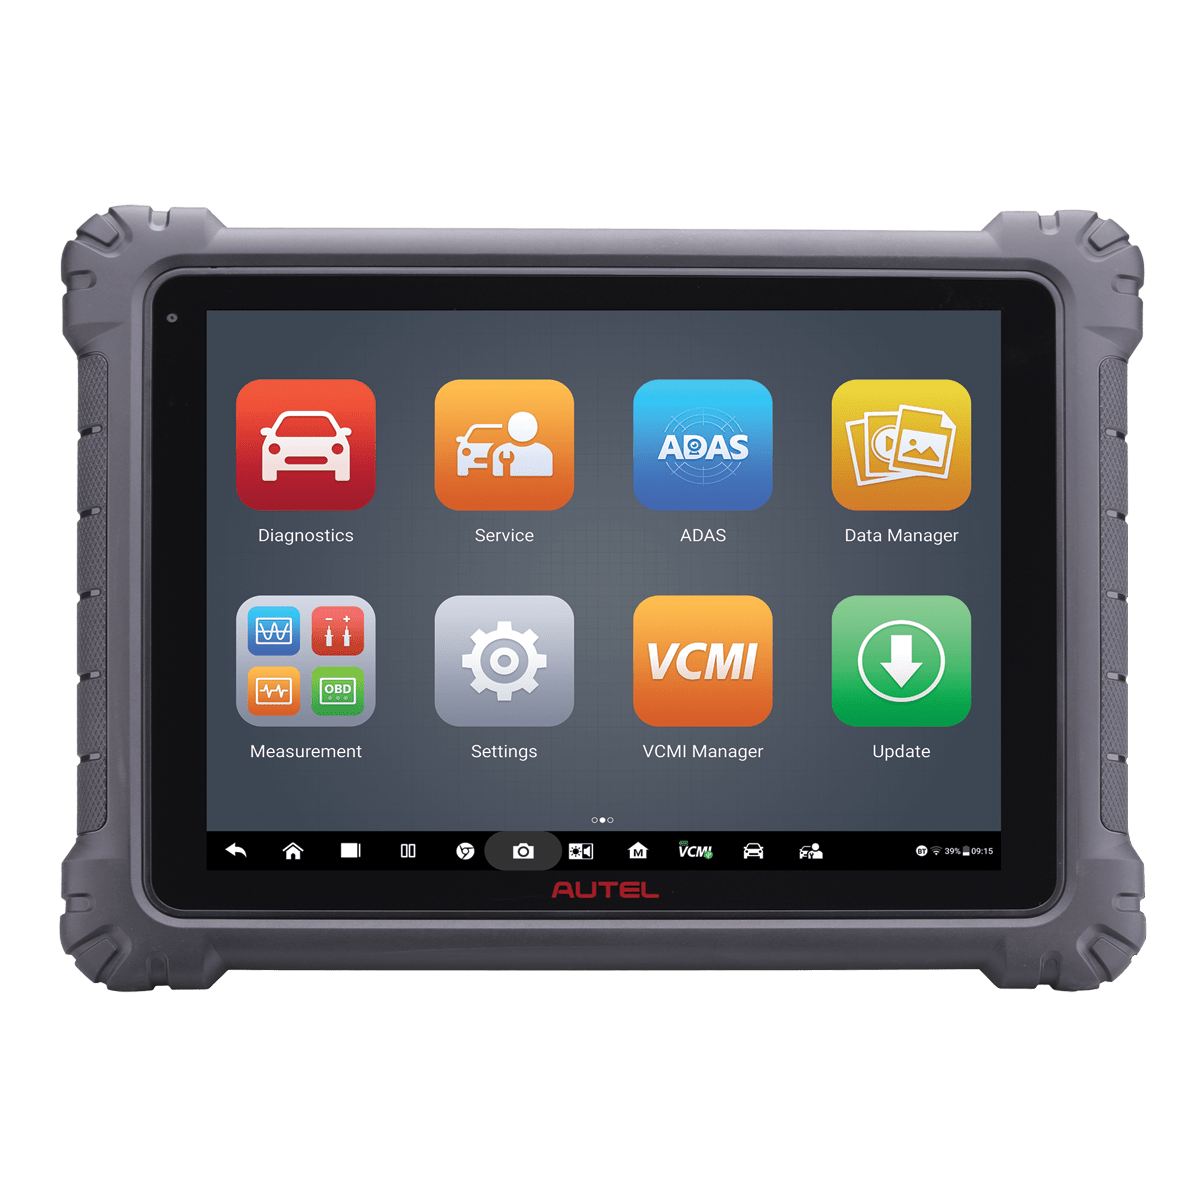 How to choose the right Autel Diagnostic Tablet for ADAS